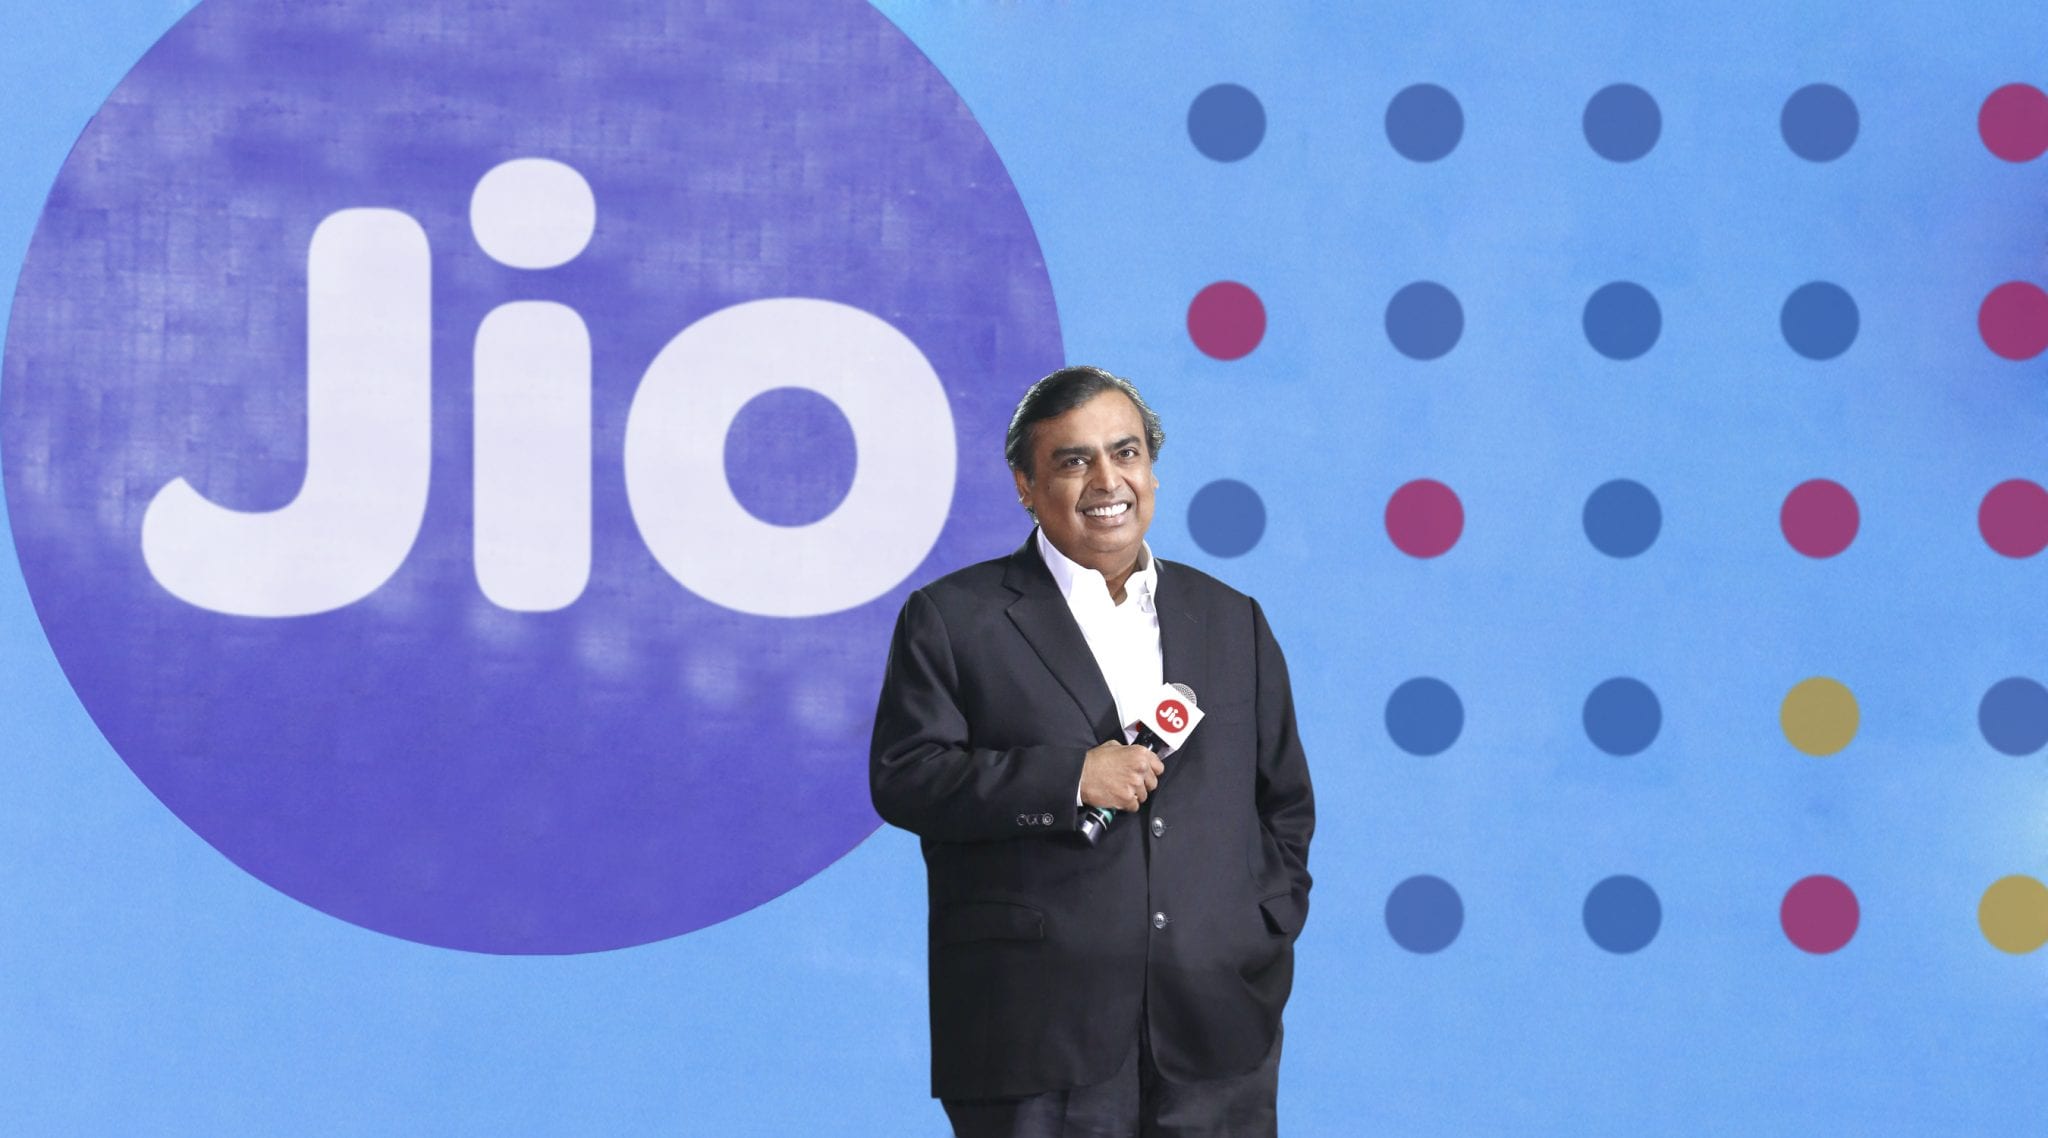 mukesh-ambani-the-ceo-of-reliance-industries-announced-that-reliance-jio-will-provide-fastest-internet-service-in-india